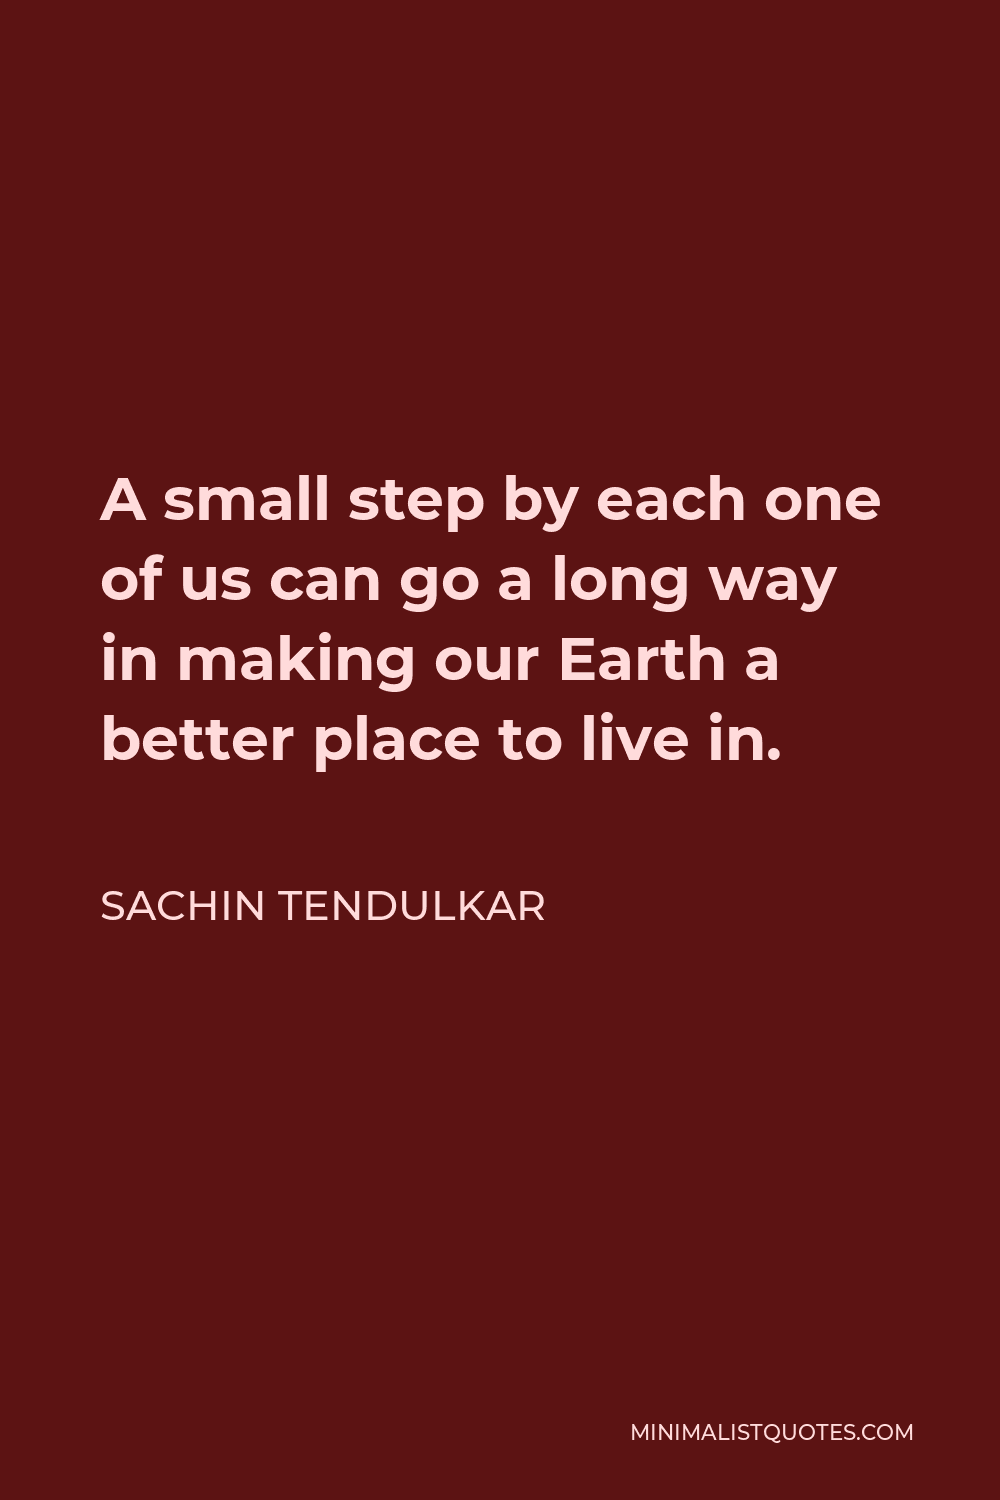 Sachin Tendulkar Quote - A small step by each one of us can go a long way in making our Earth a better place to live in.